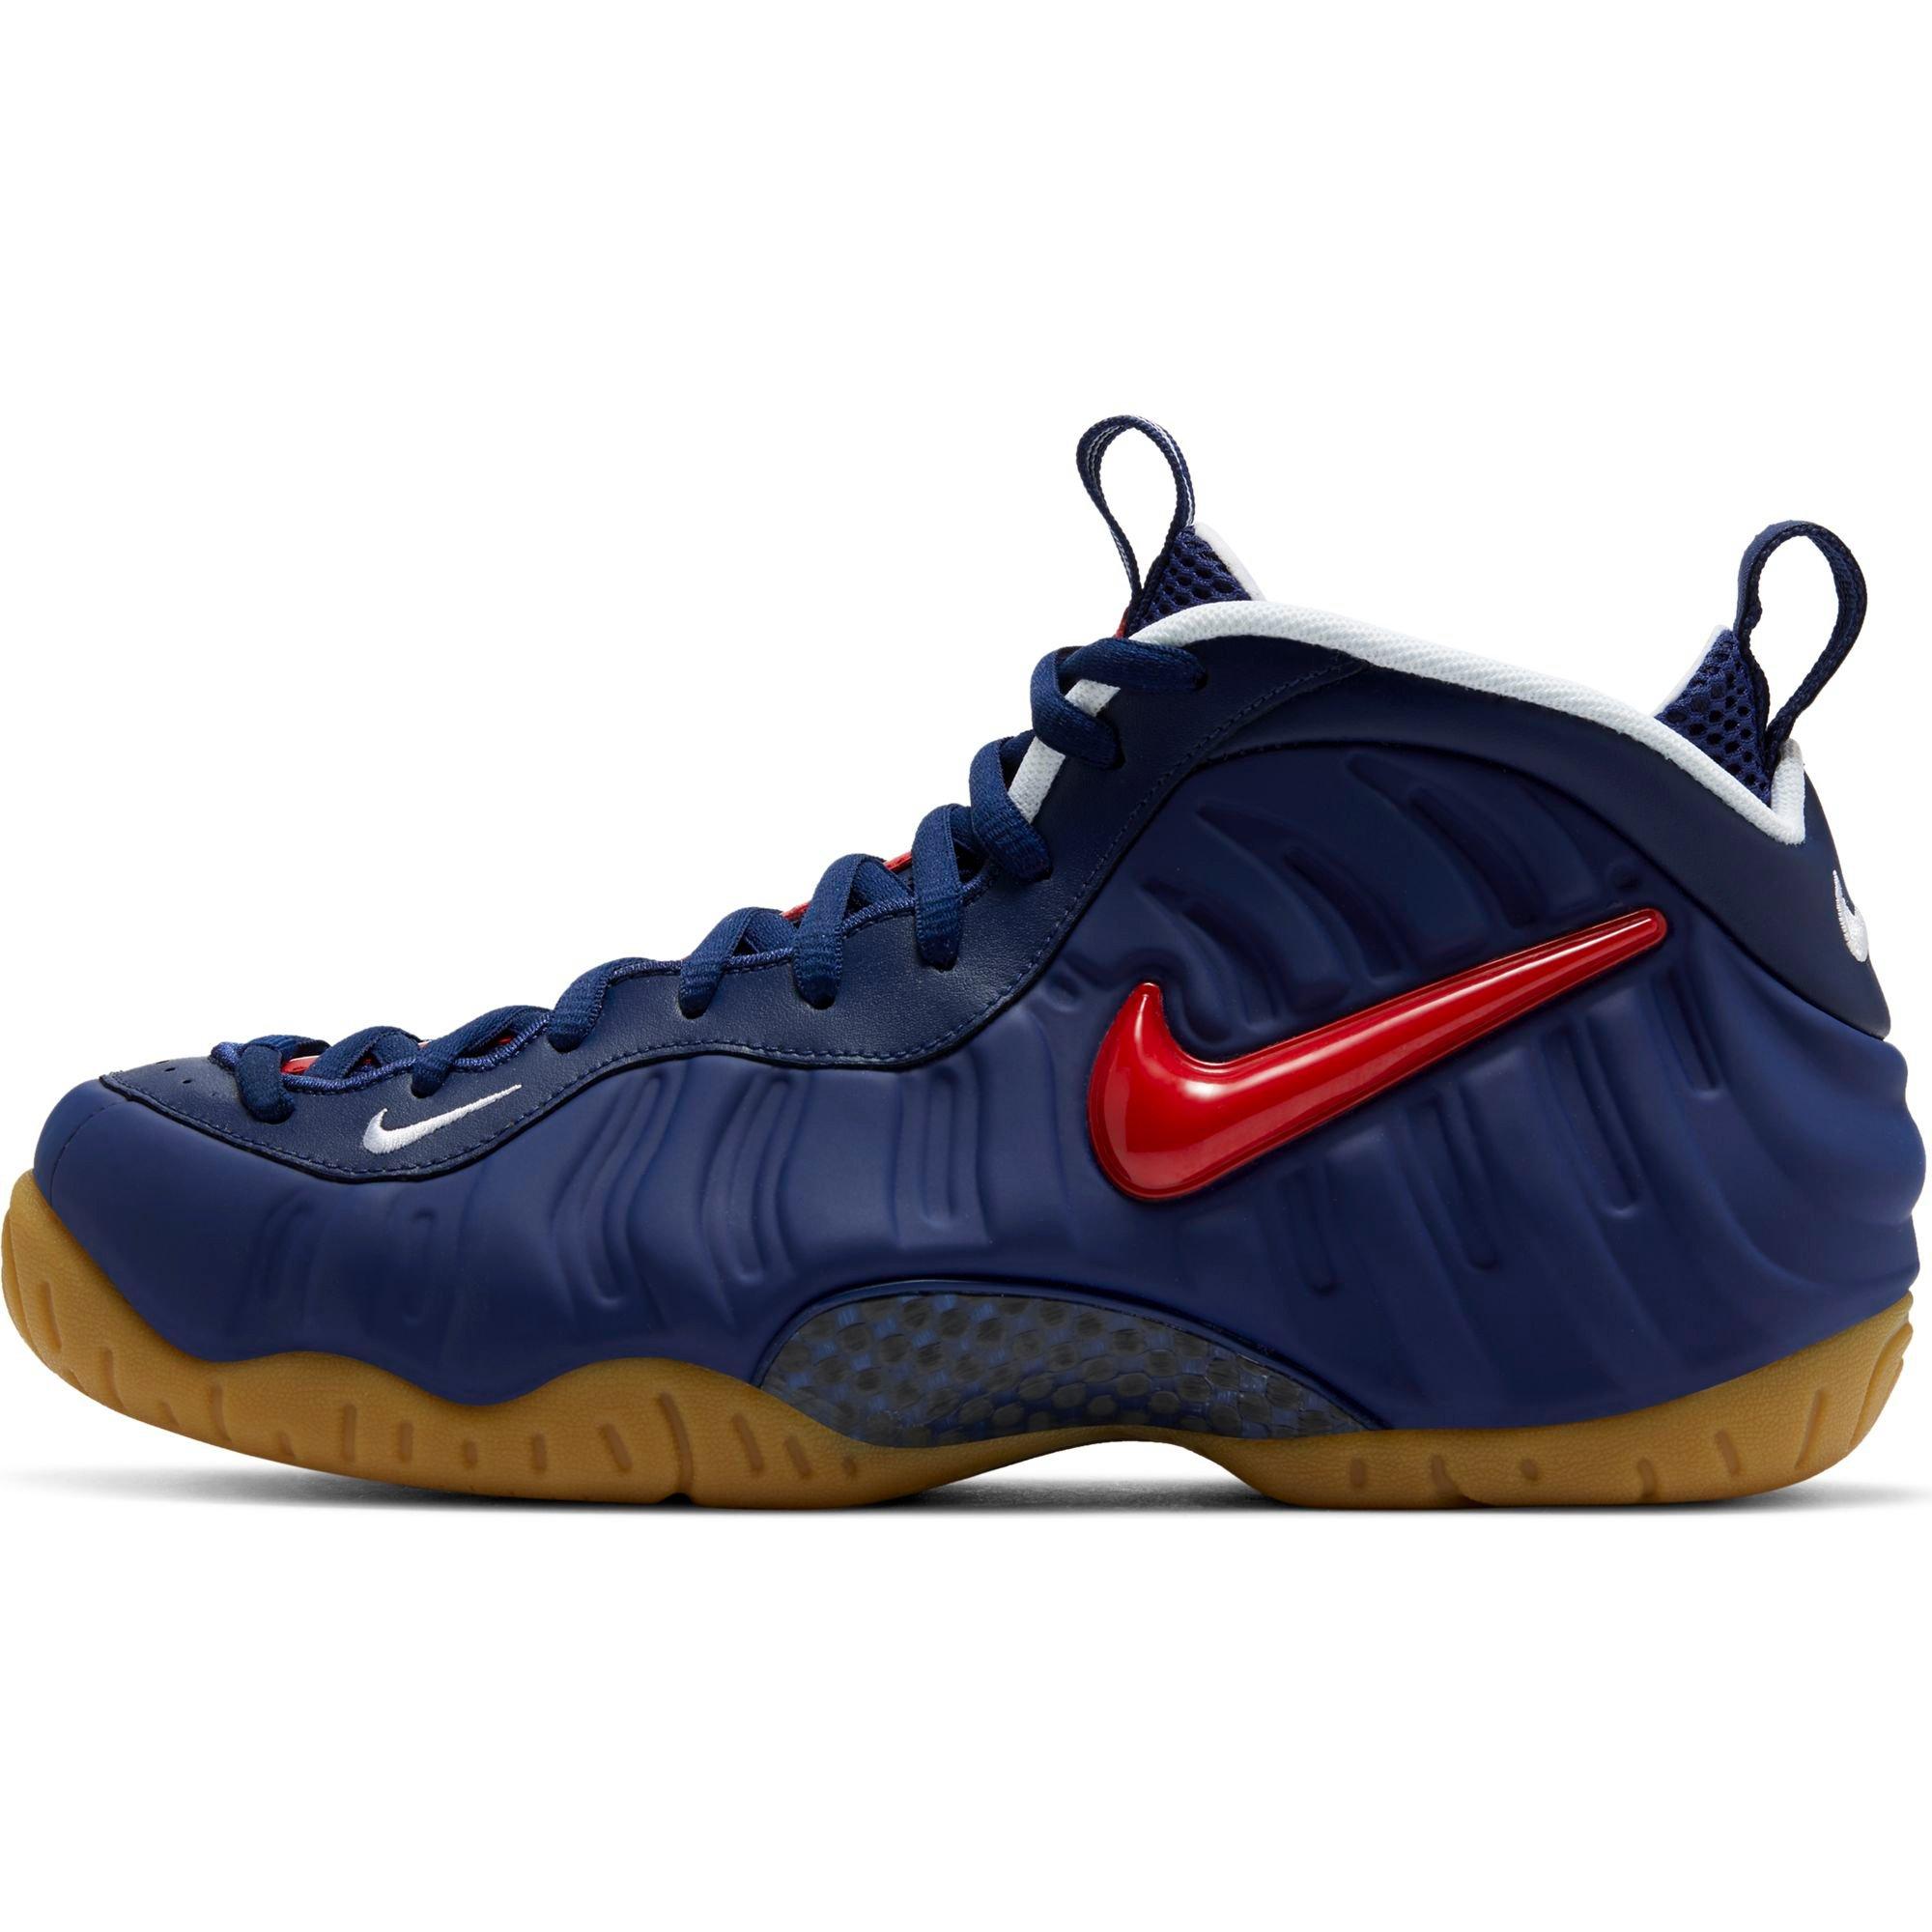 red and blue foamposite